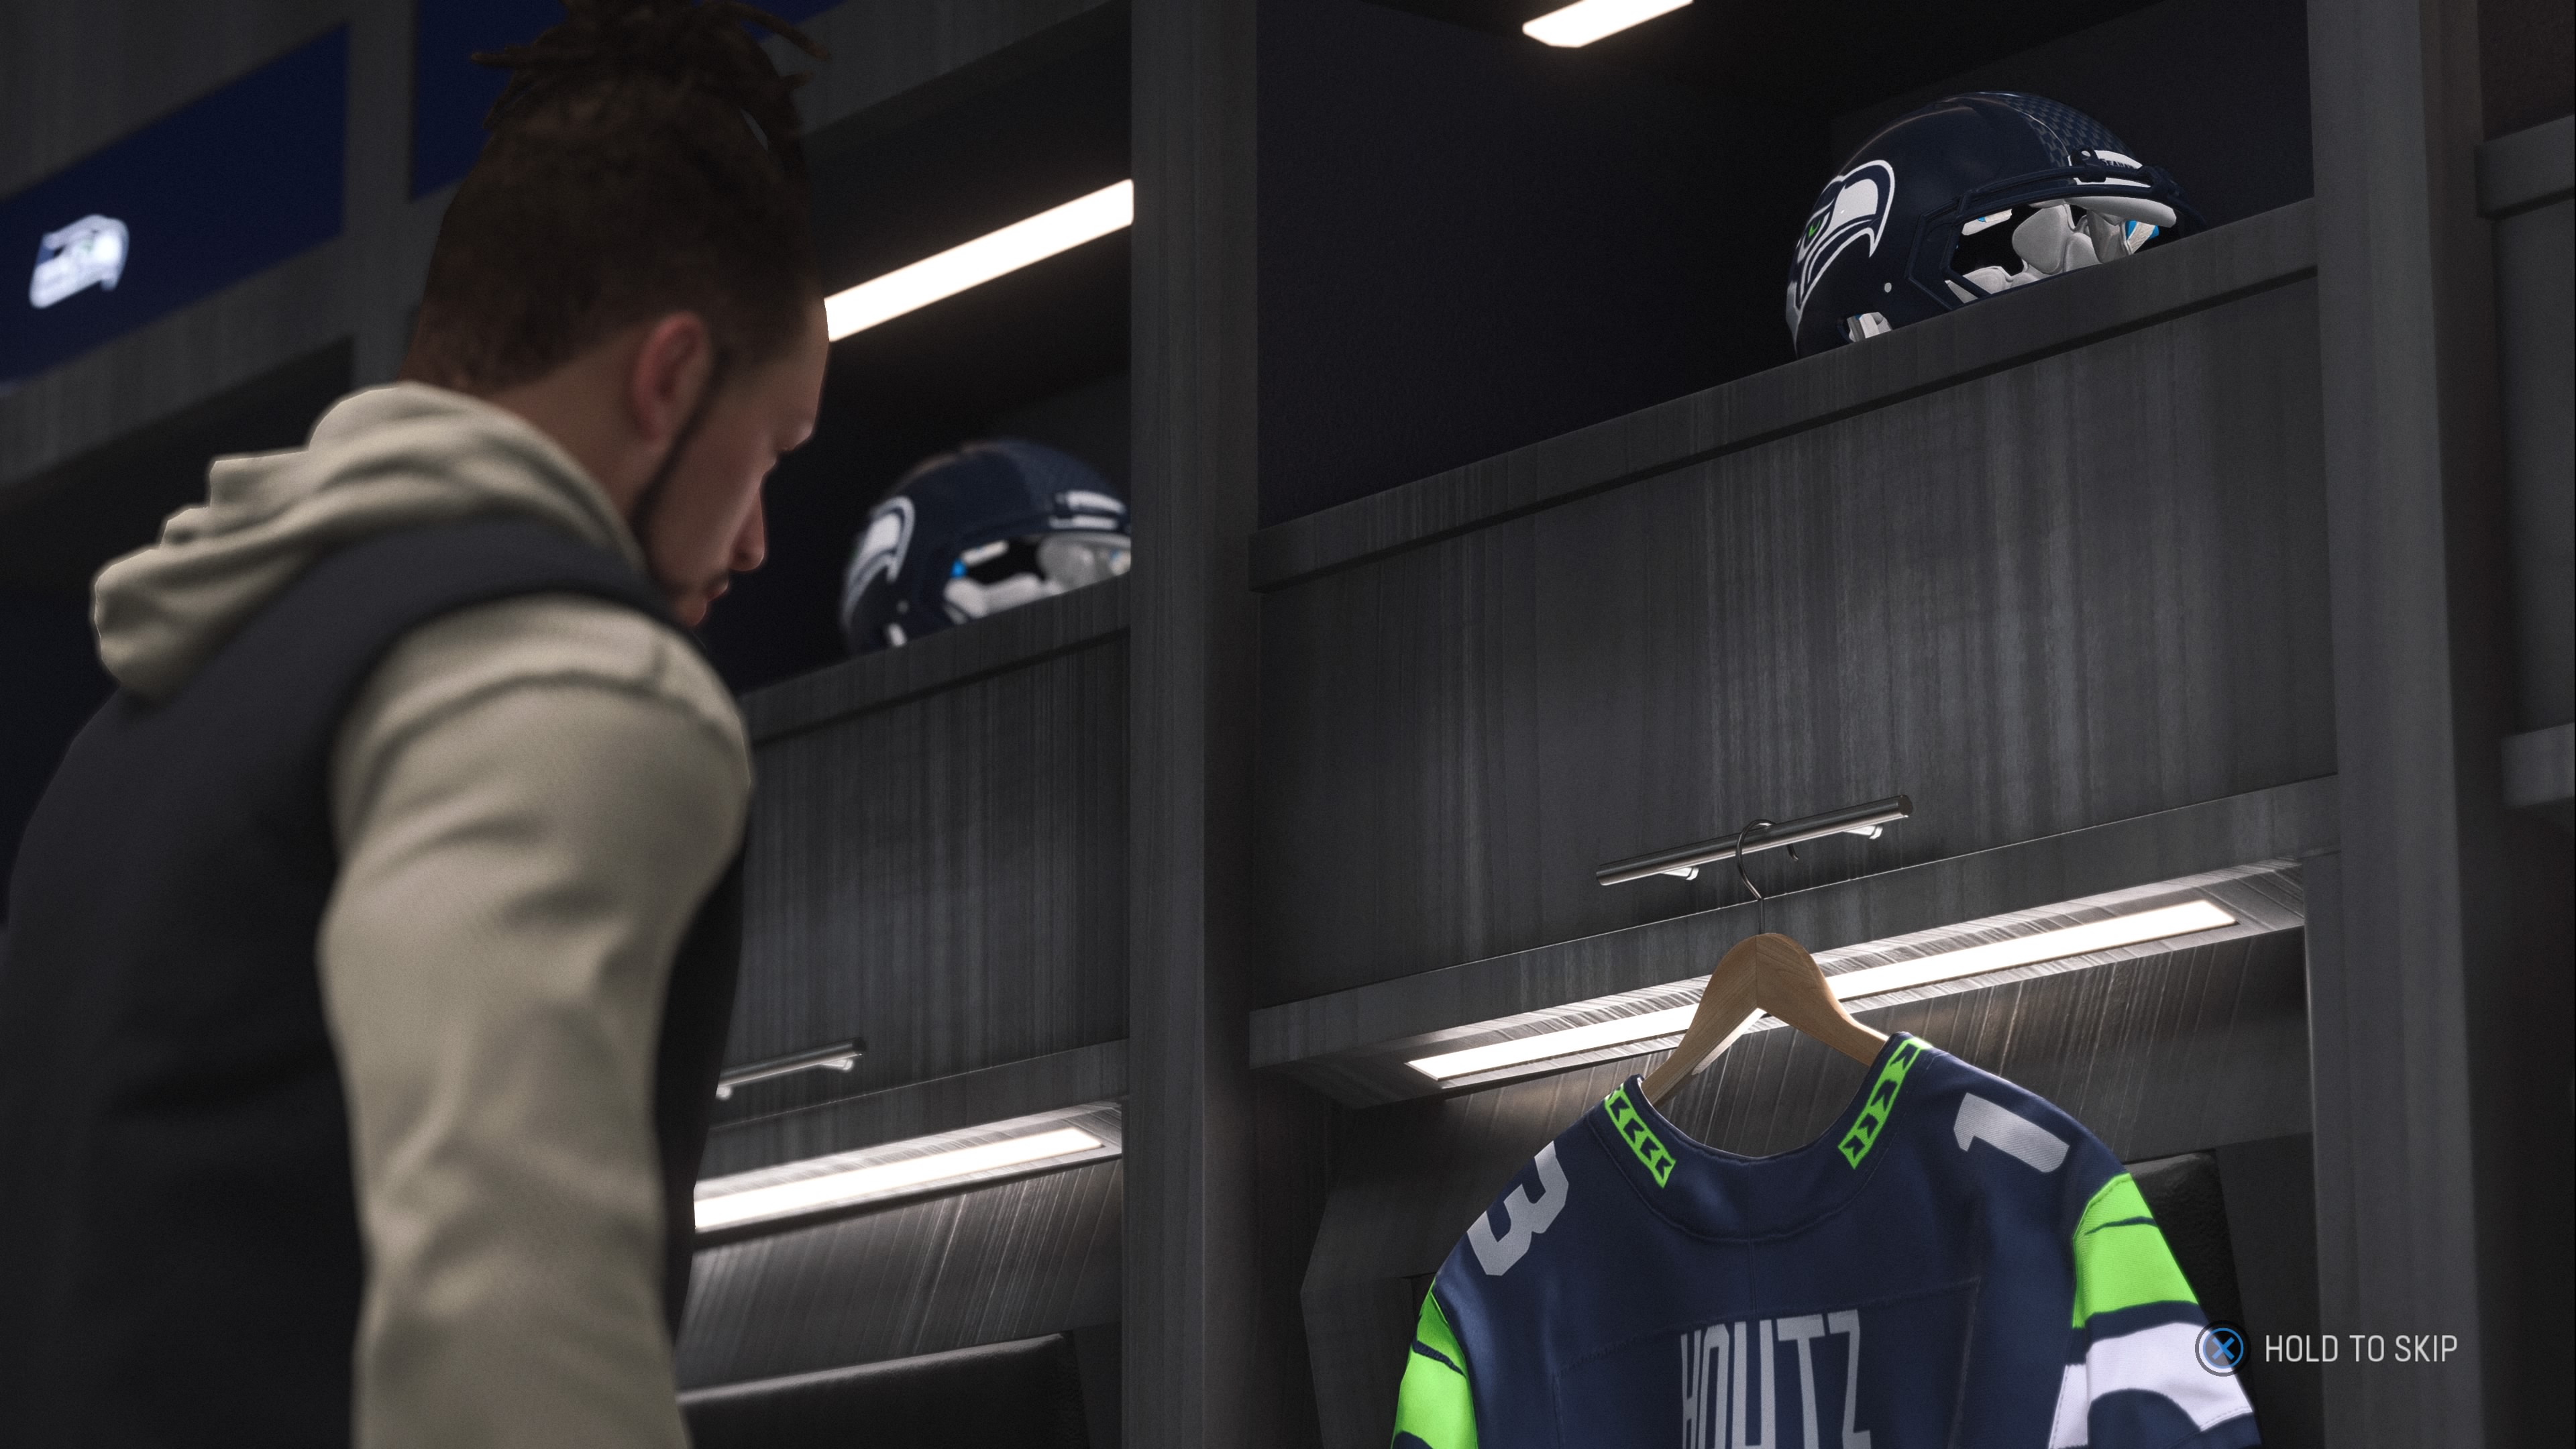 Madden NFL 23 Review: EA's Football Franchise Finally Turns a Corner